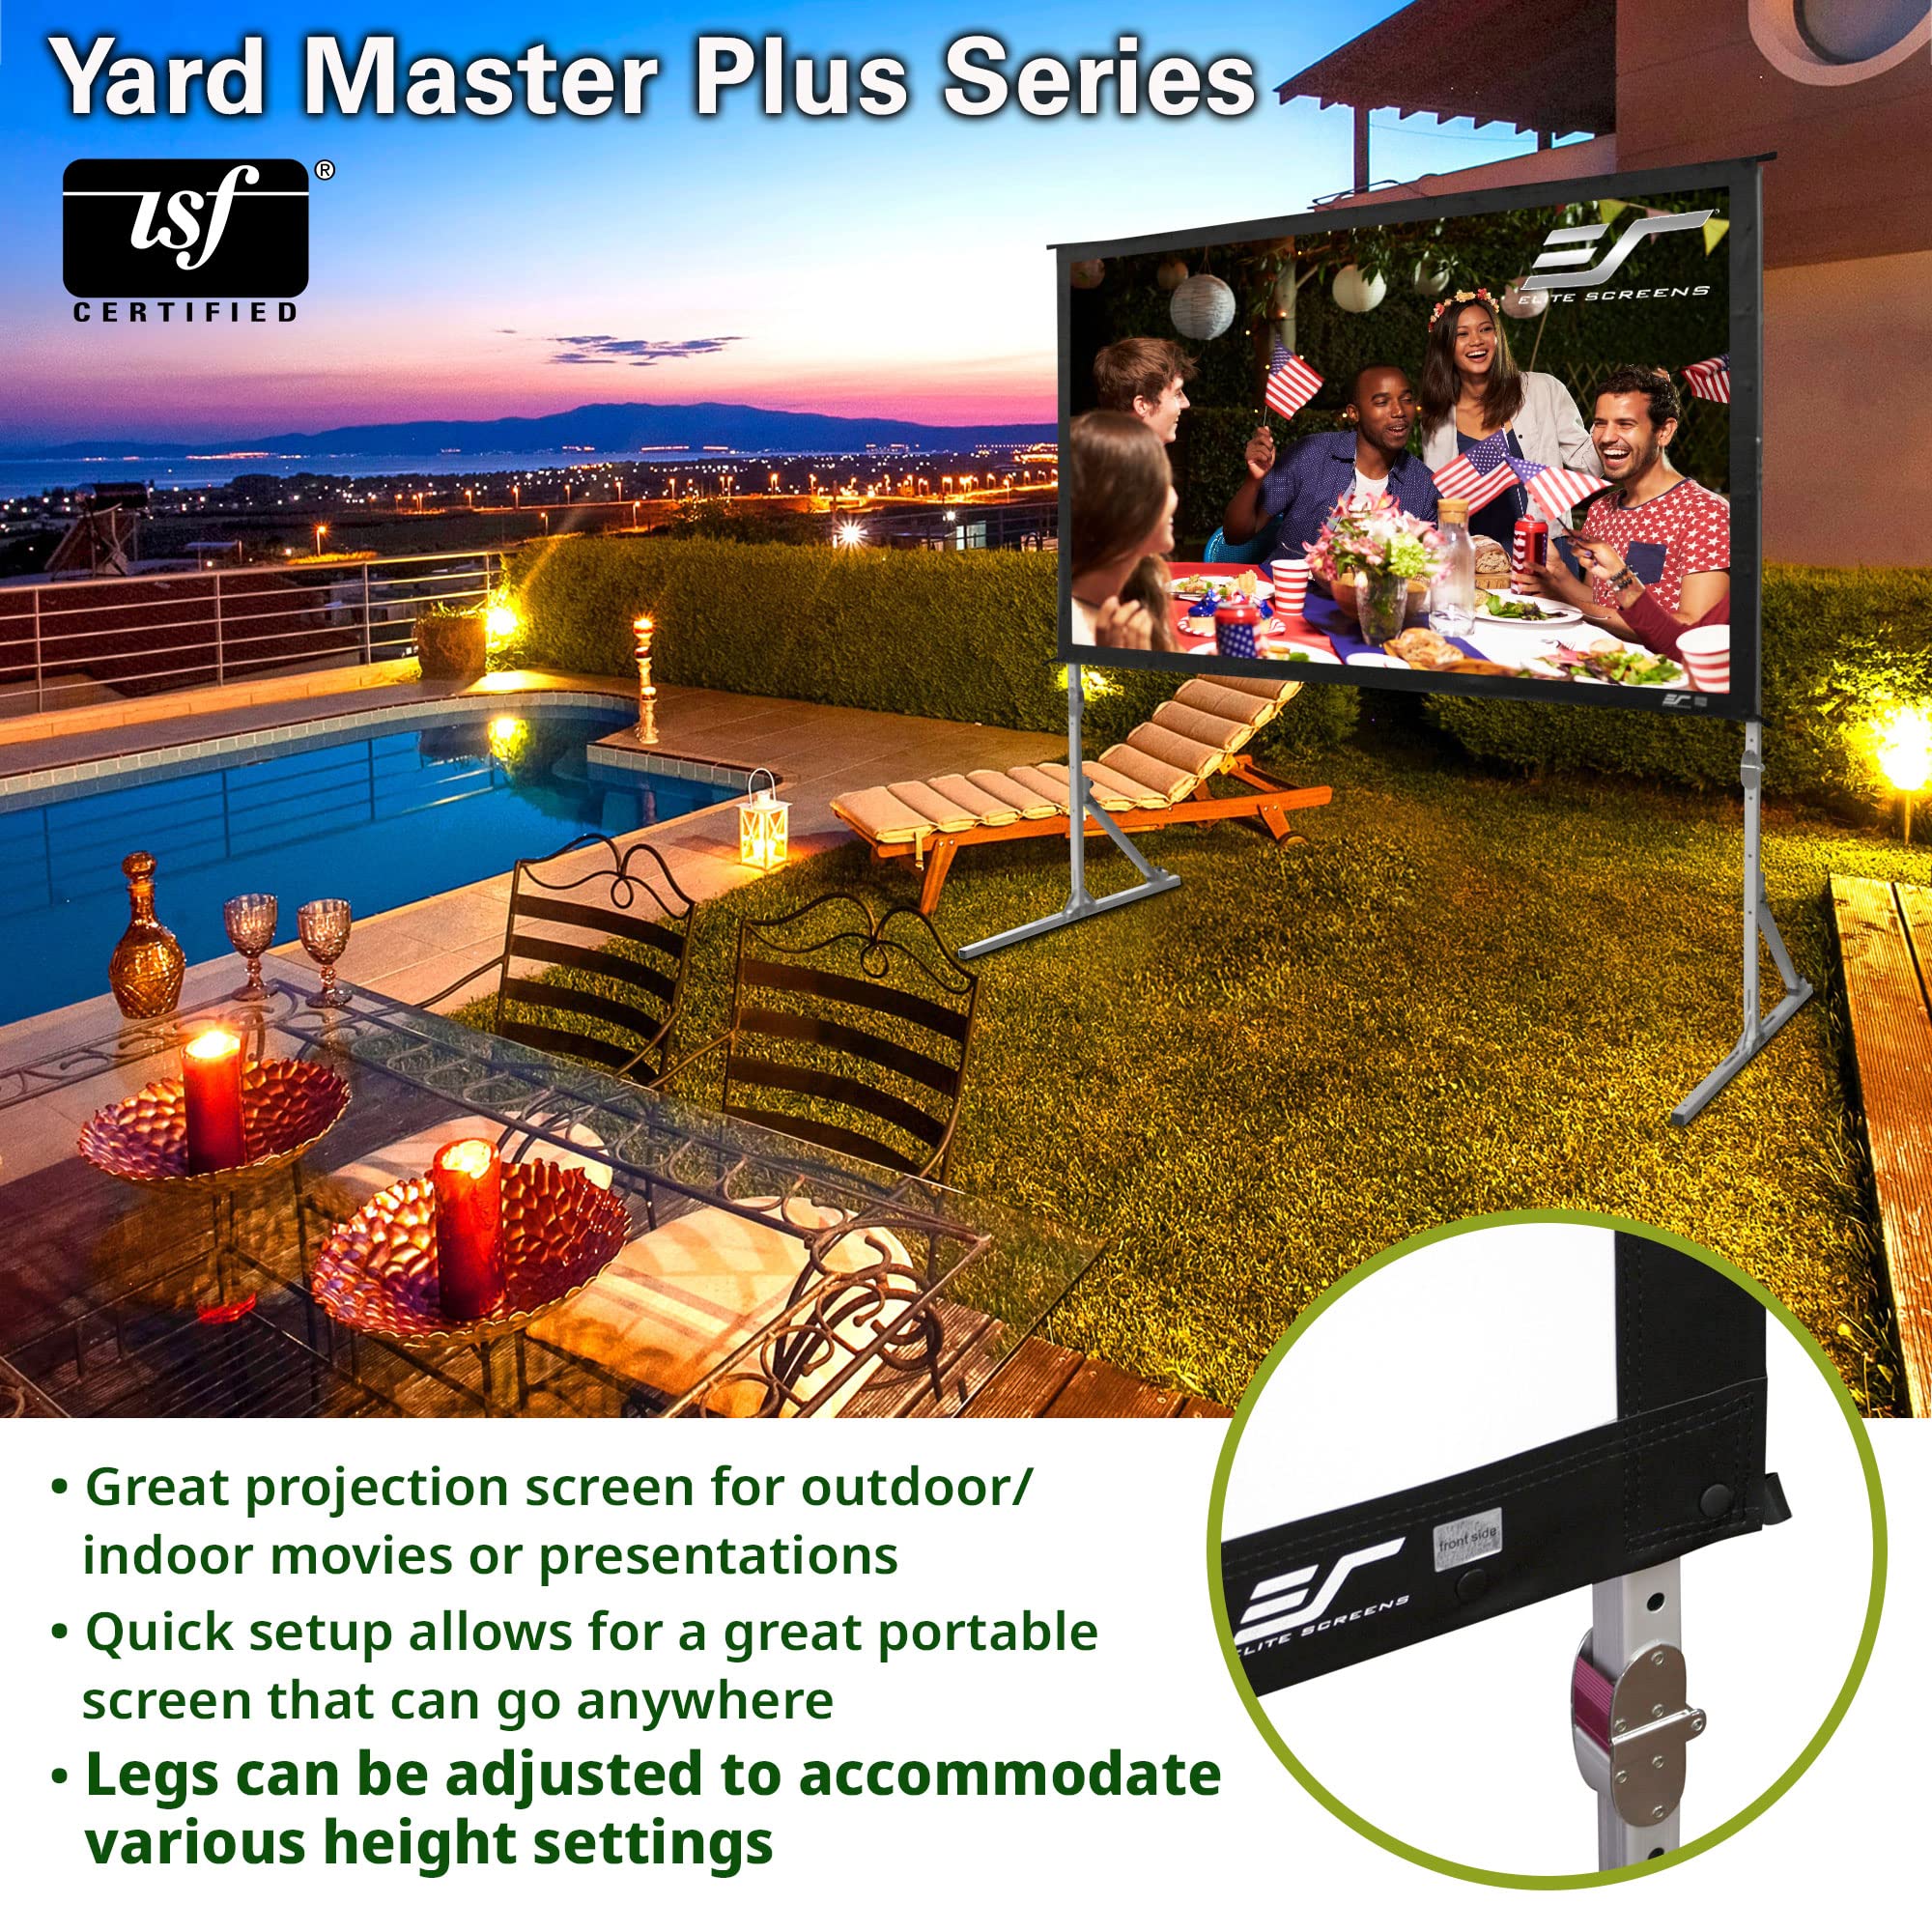 Elite Screens Yard Master Plus, 100-INCH 16:9, 8K 4K Ultra HD 3D Ready Indoor/Outdoor Portable Home Movie Theater Projector Screen, Front Projection - OMS100H2PLUS | US Based Company 2-YEAR WARRANTY